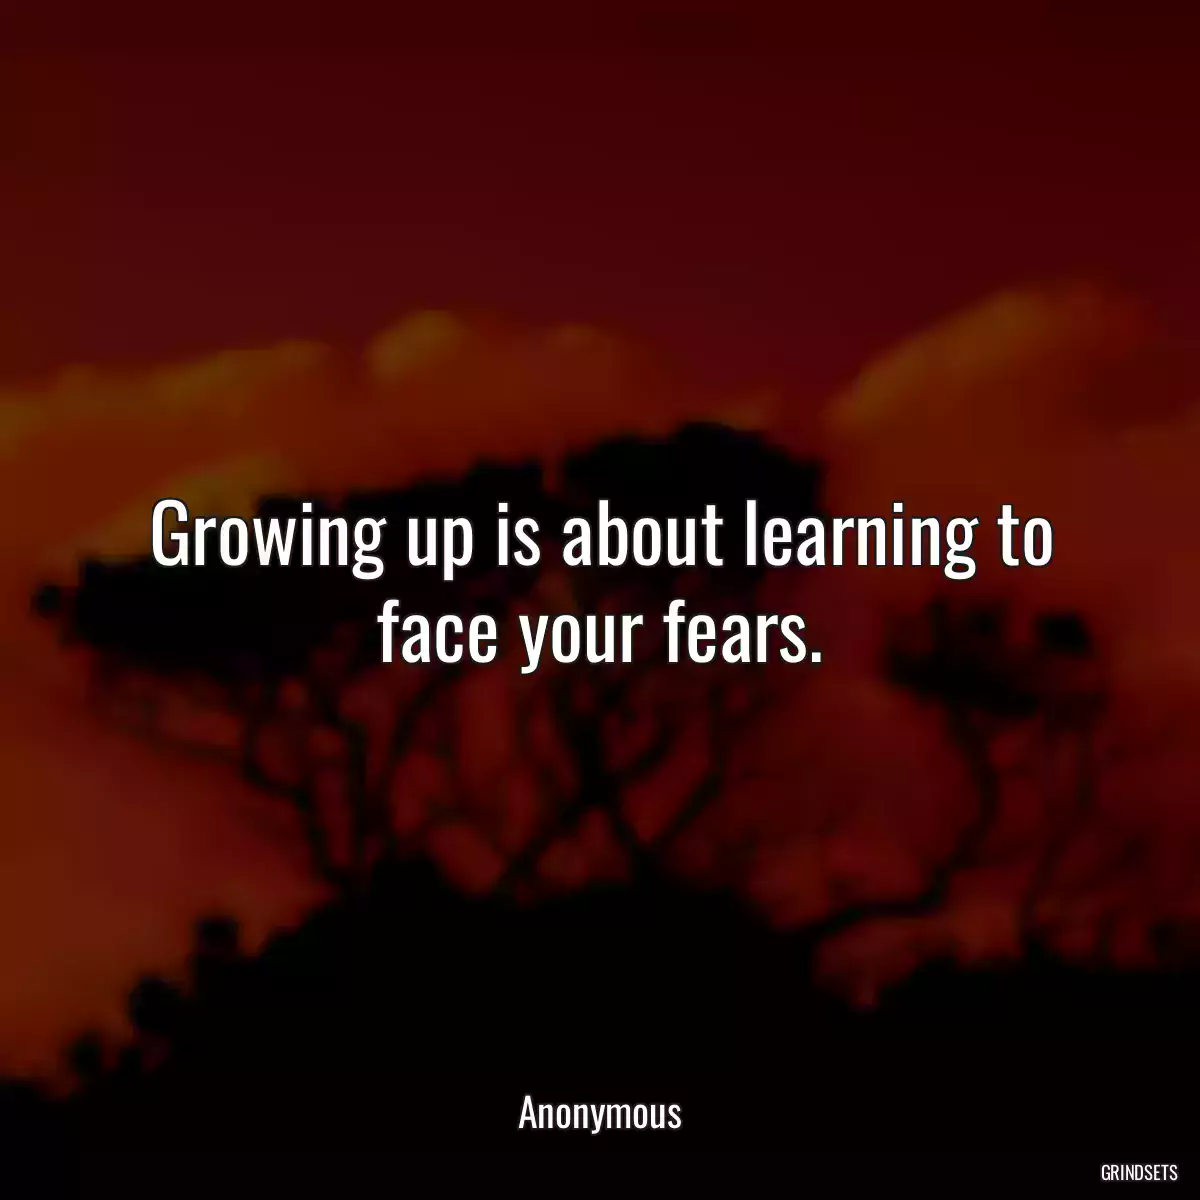 Growing up is about learning to face your fears.